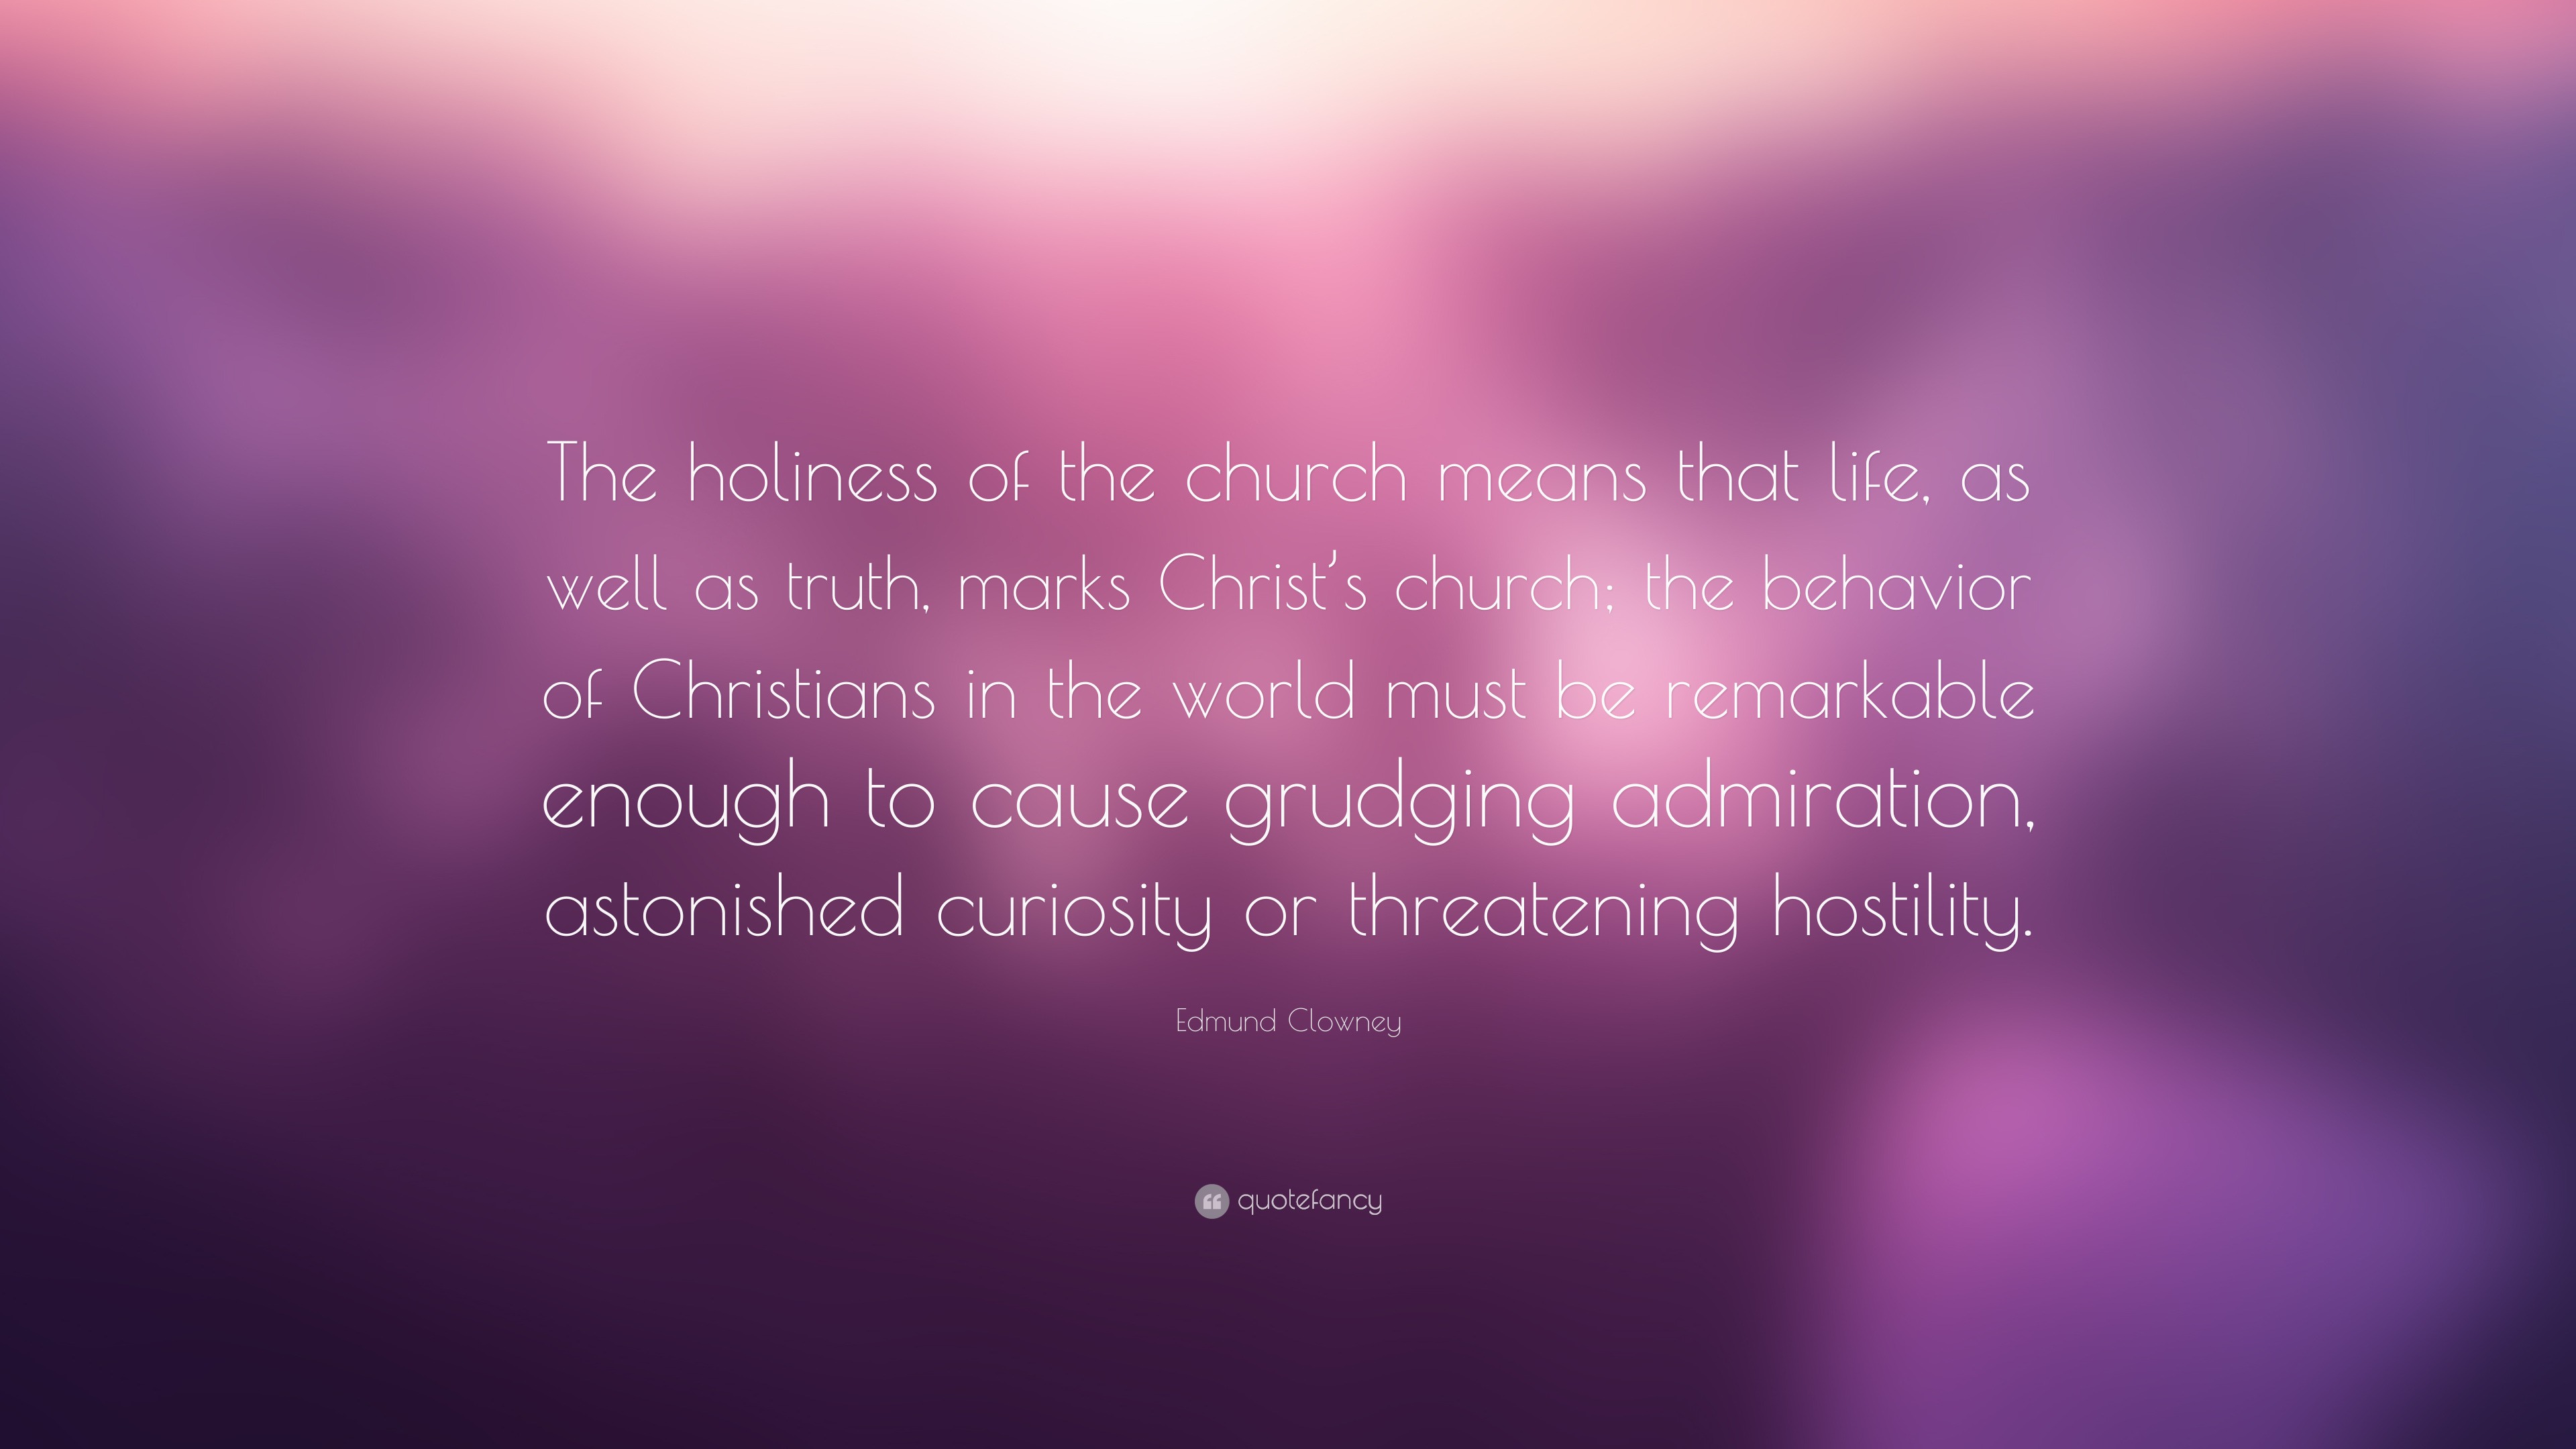 Edmund Clowney Quote: “The holiness of the church means that life, as ...